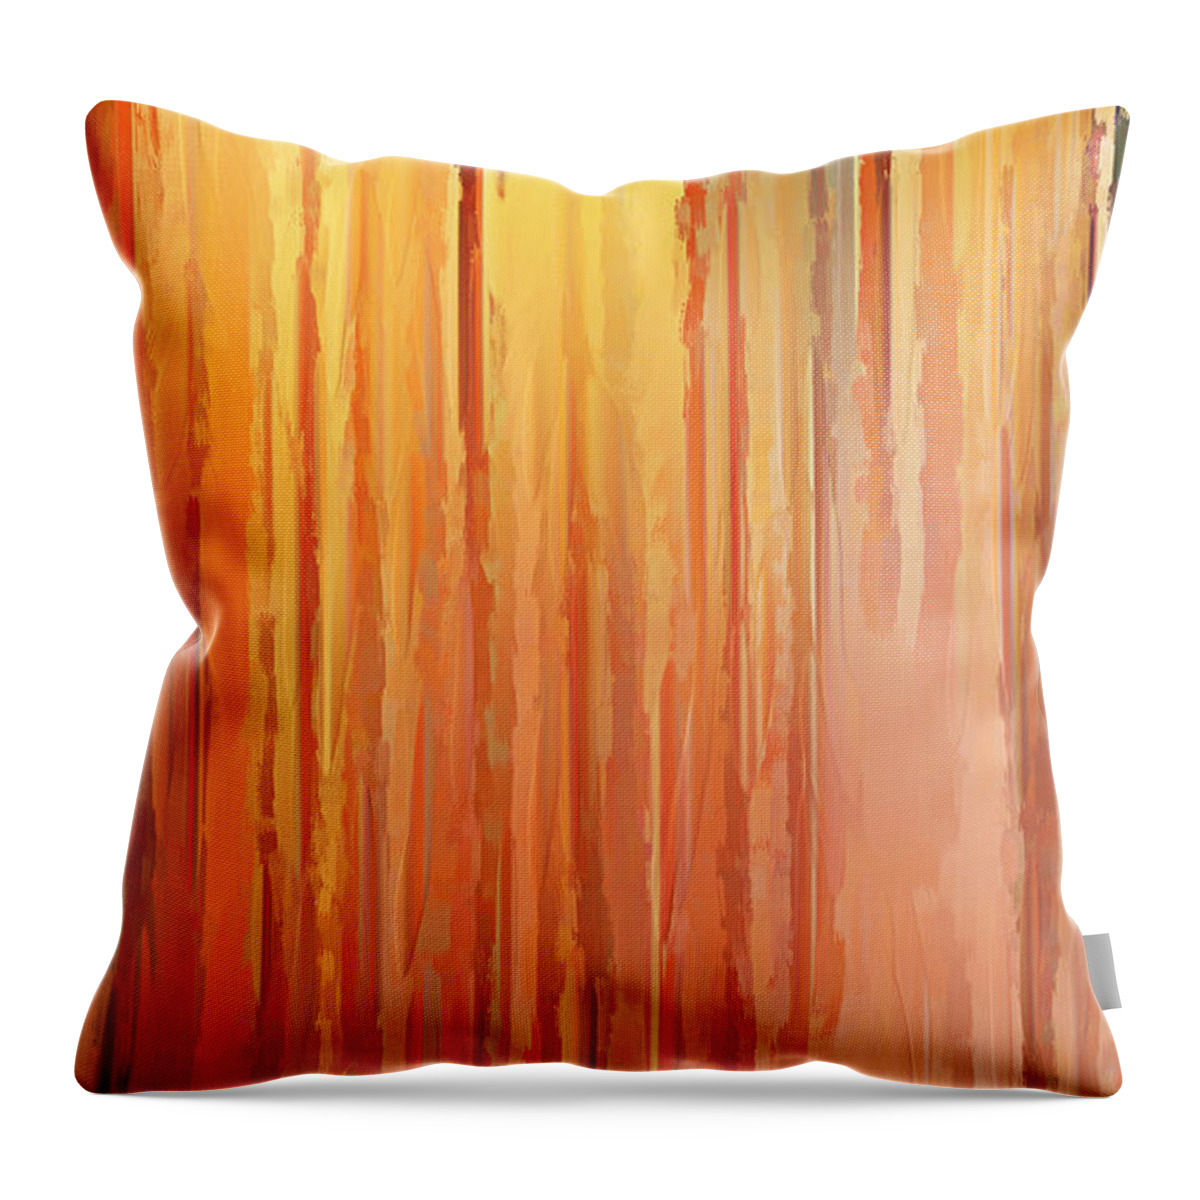 Orange Throw Pillow featuring the painting Sunset Infinity by Lourry Legarde